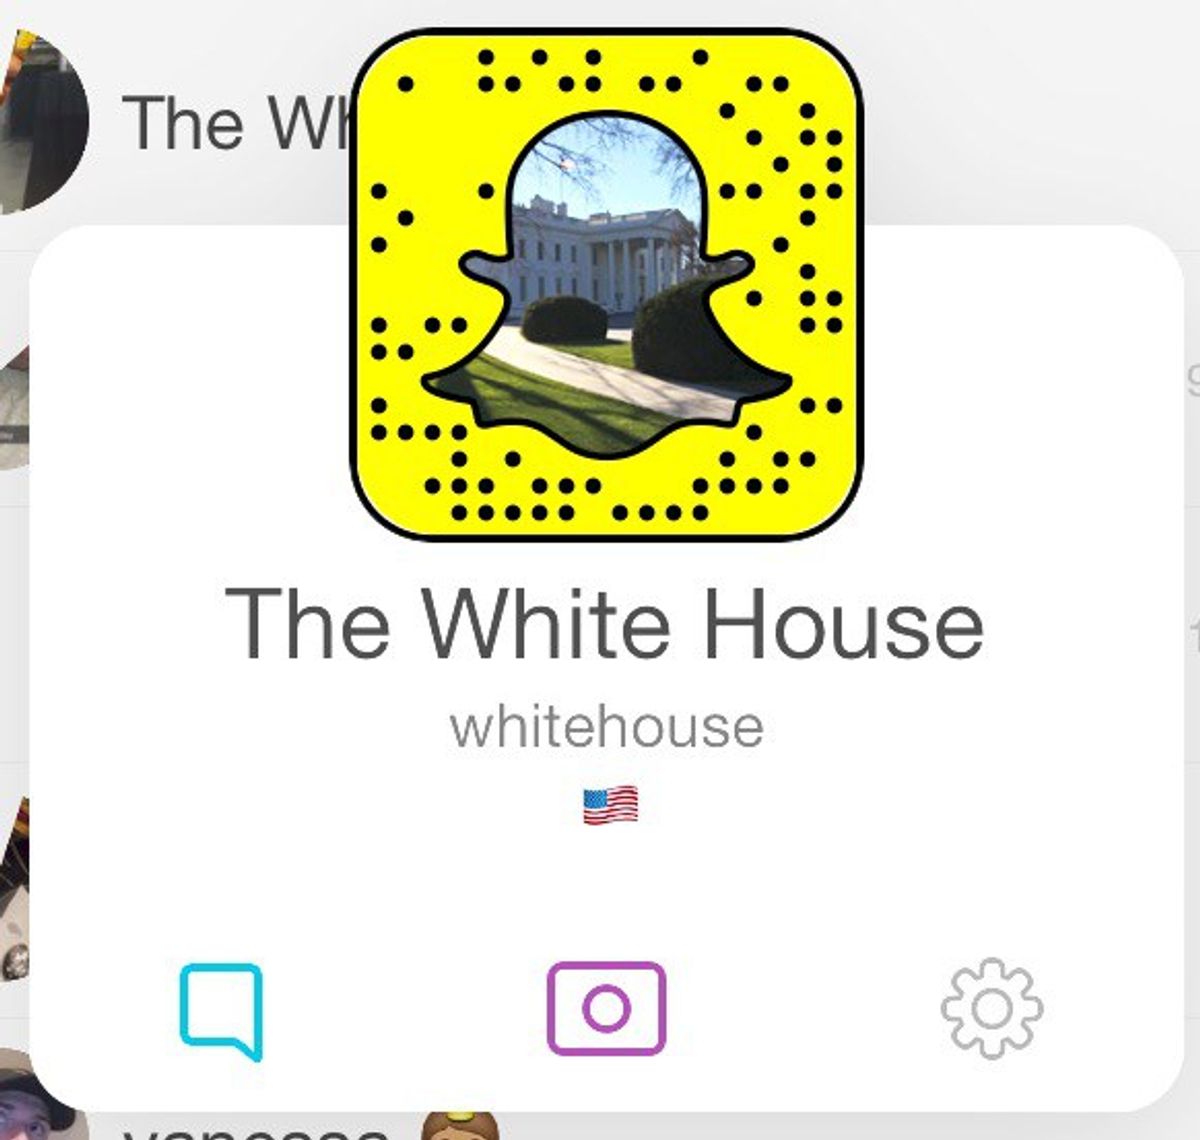 Find Out What Is Going On At The White House